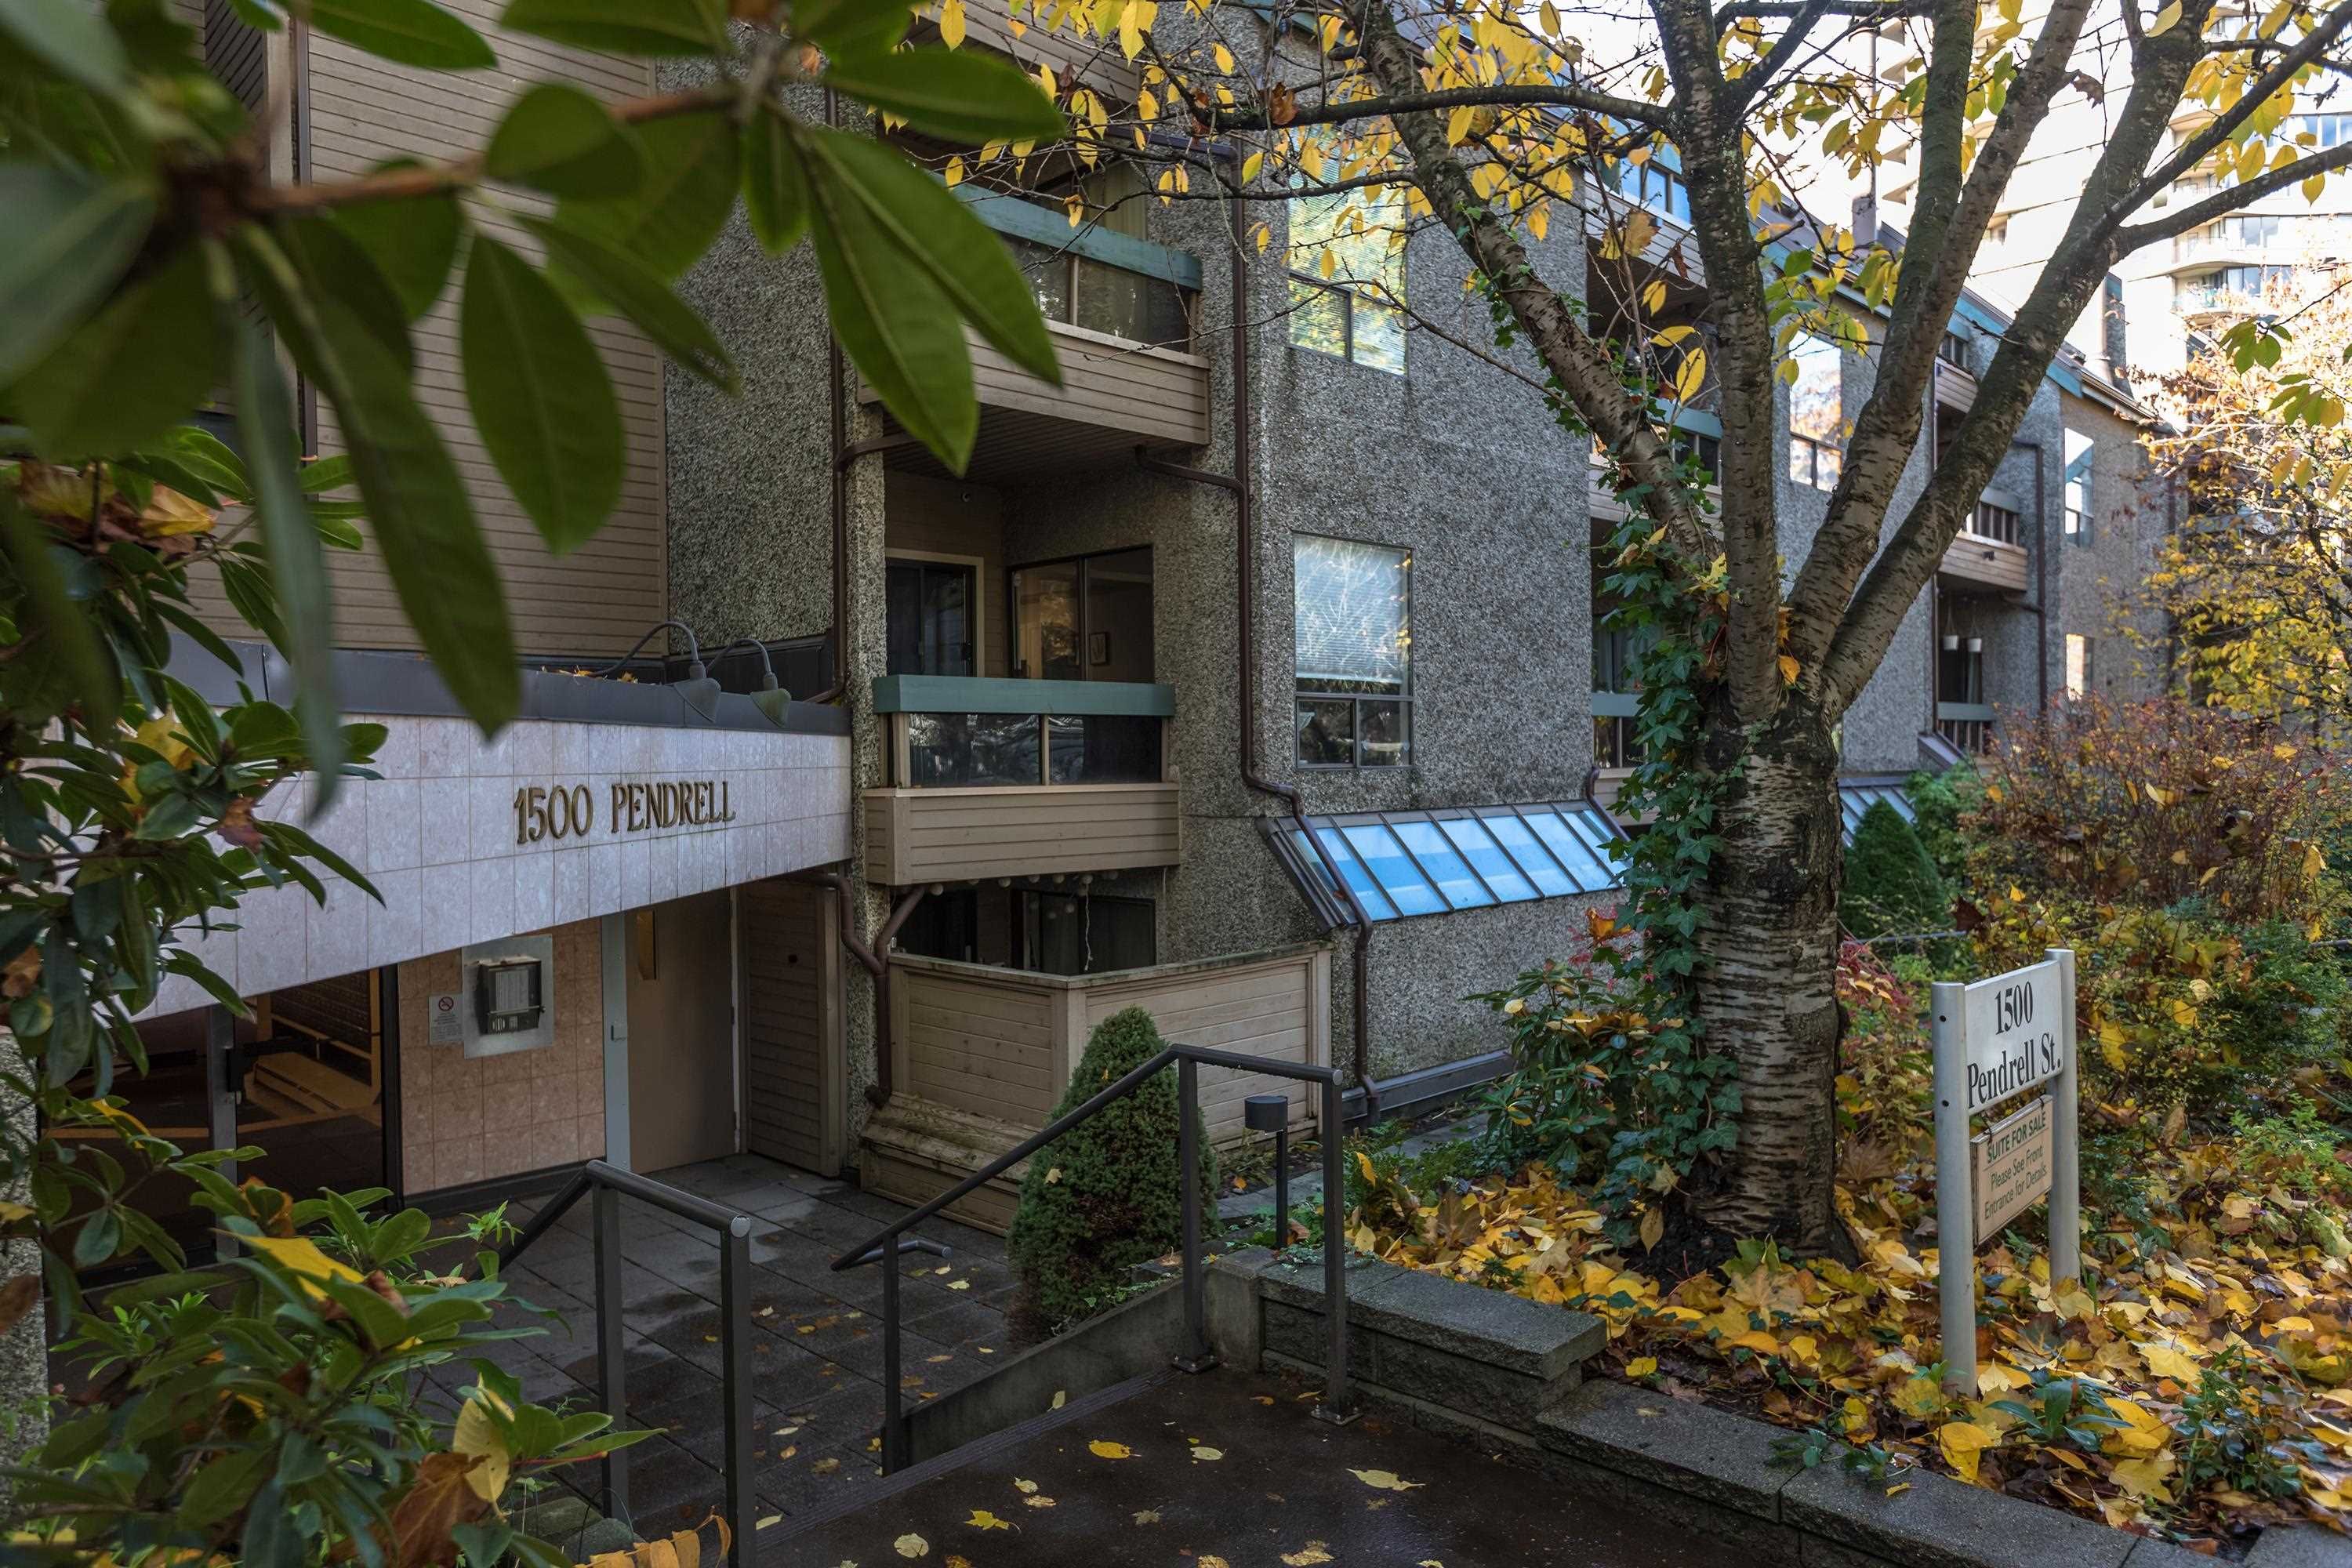 Main Photo: 111 1500 PENDRELL STREET in : West End VW Condo for sale : MLS®# R2631860